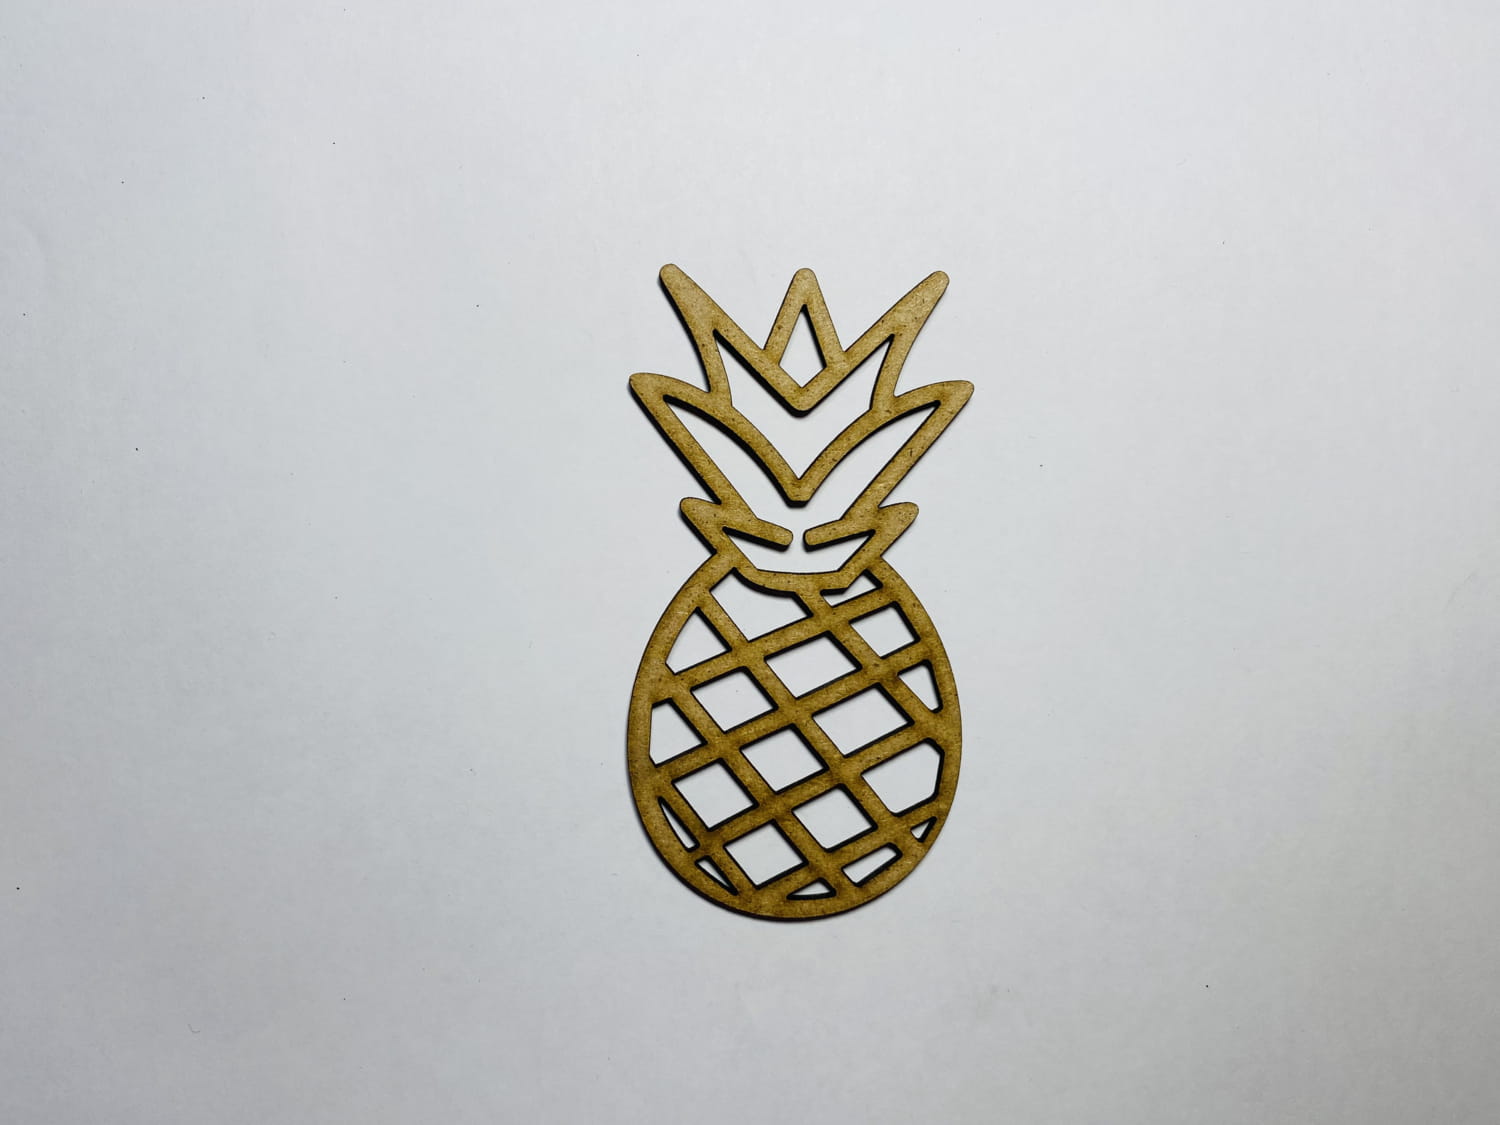 Laser Cut Pineapple Unfinished Wood Cutout Shape Free Vector